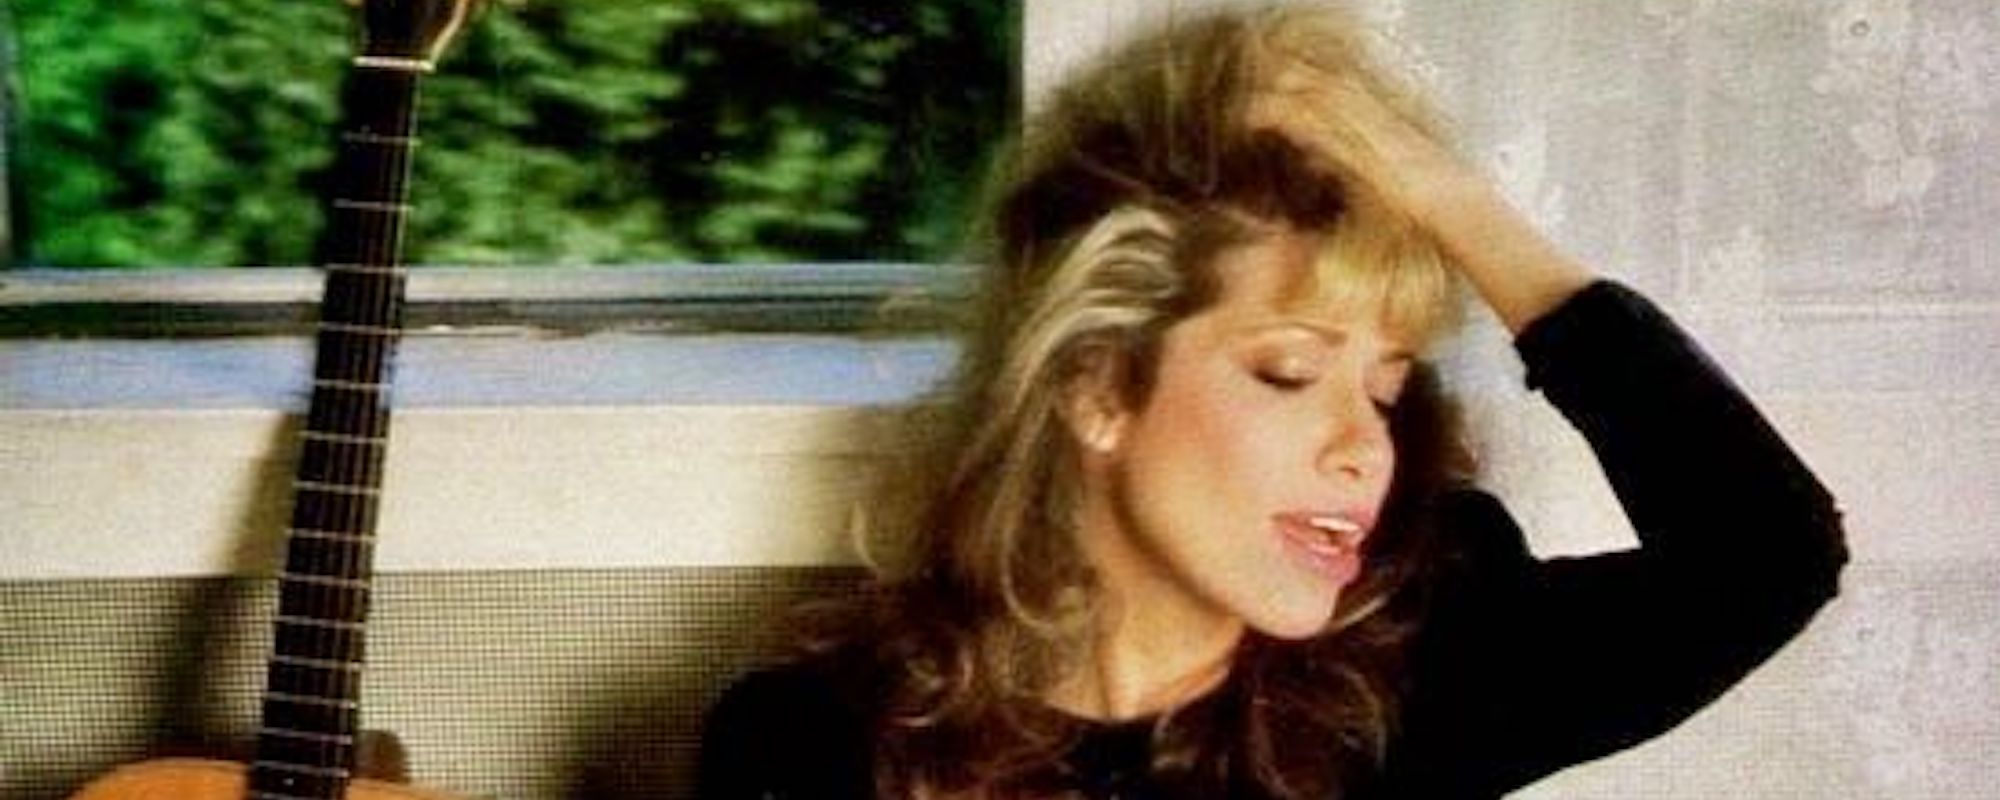 Behind the Song Lyrics: “Coming Around Again” by Carly Simon